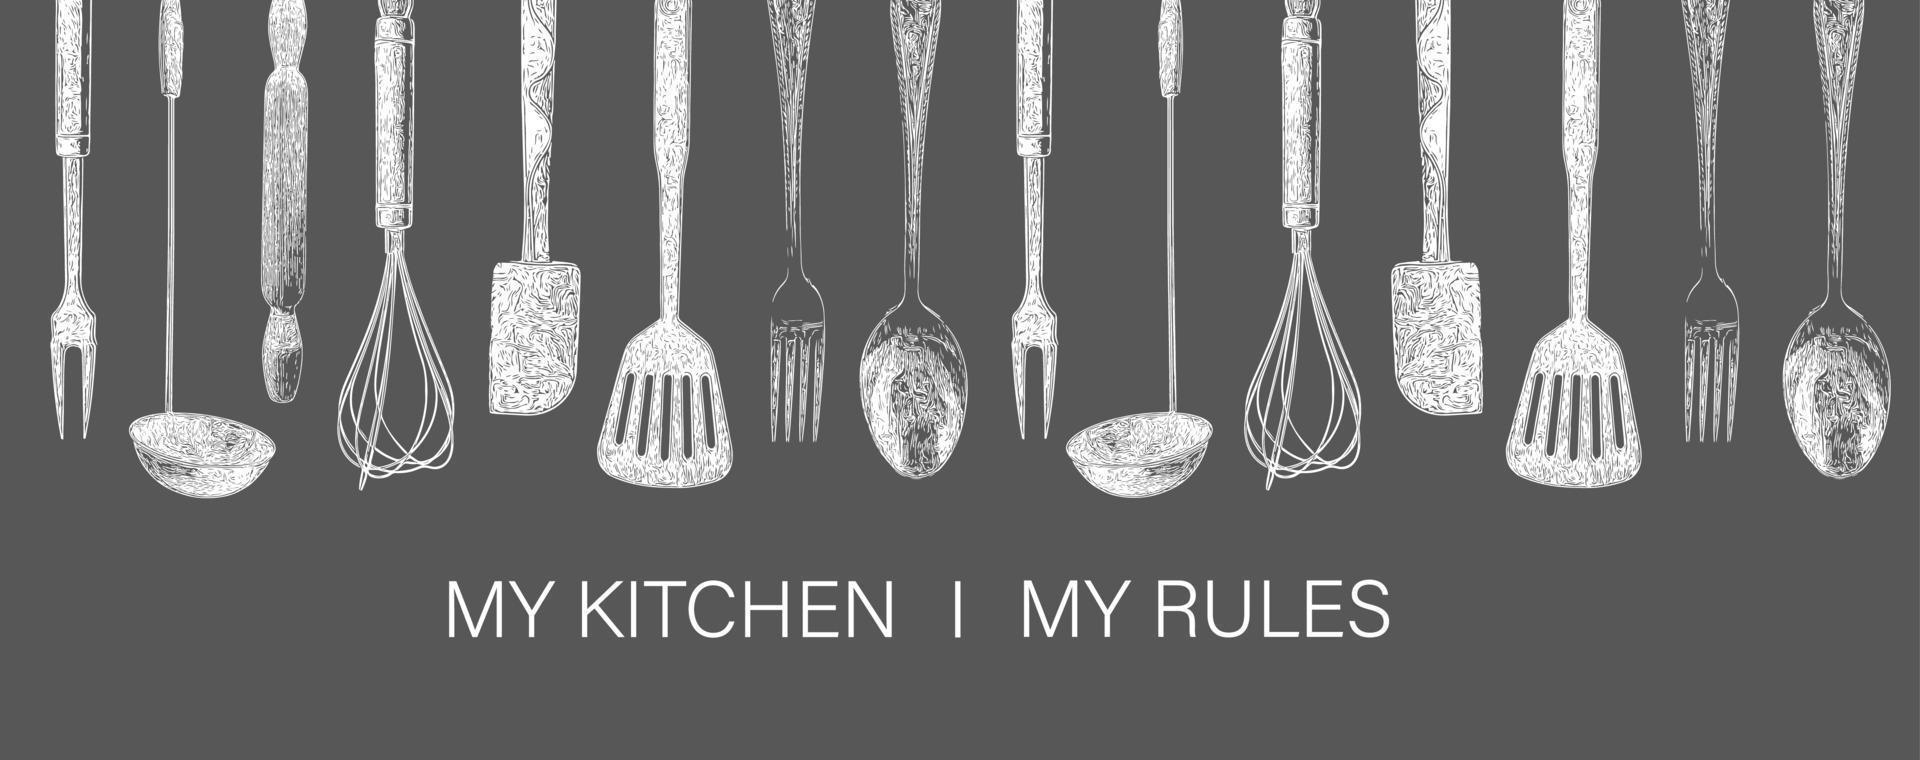 Hand drawn typography poster.My kitchen, my rules. vector